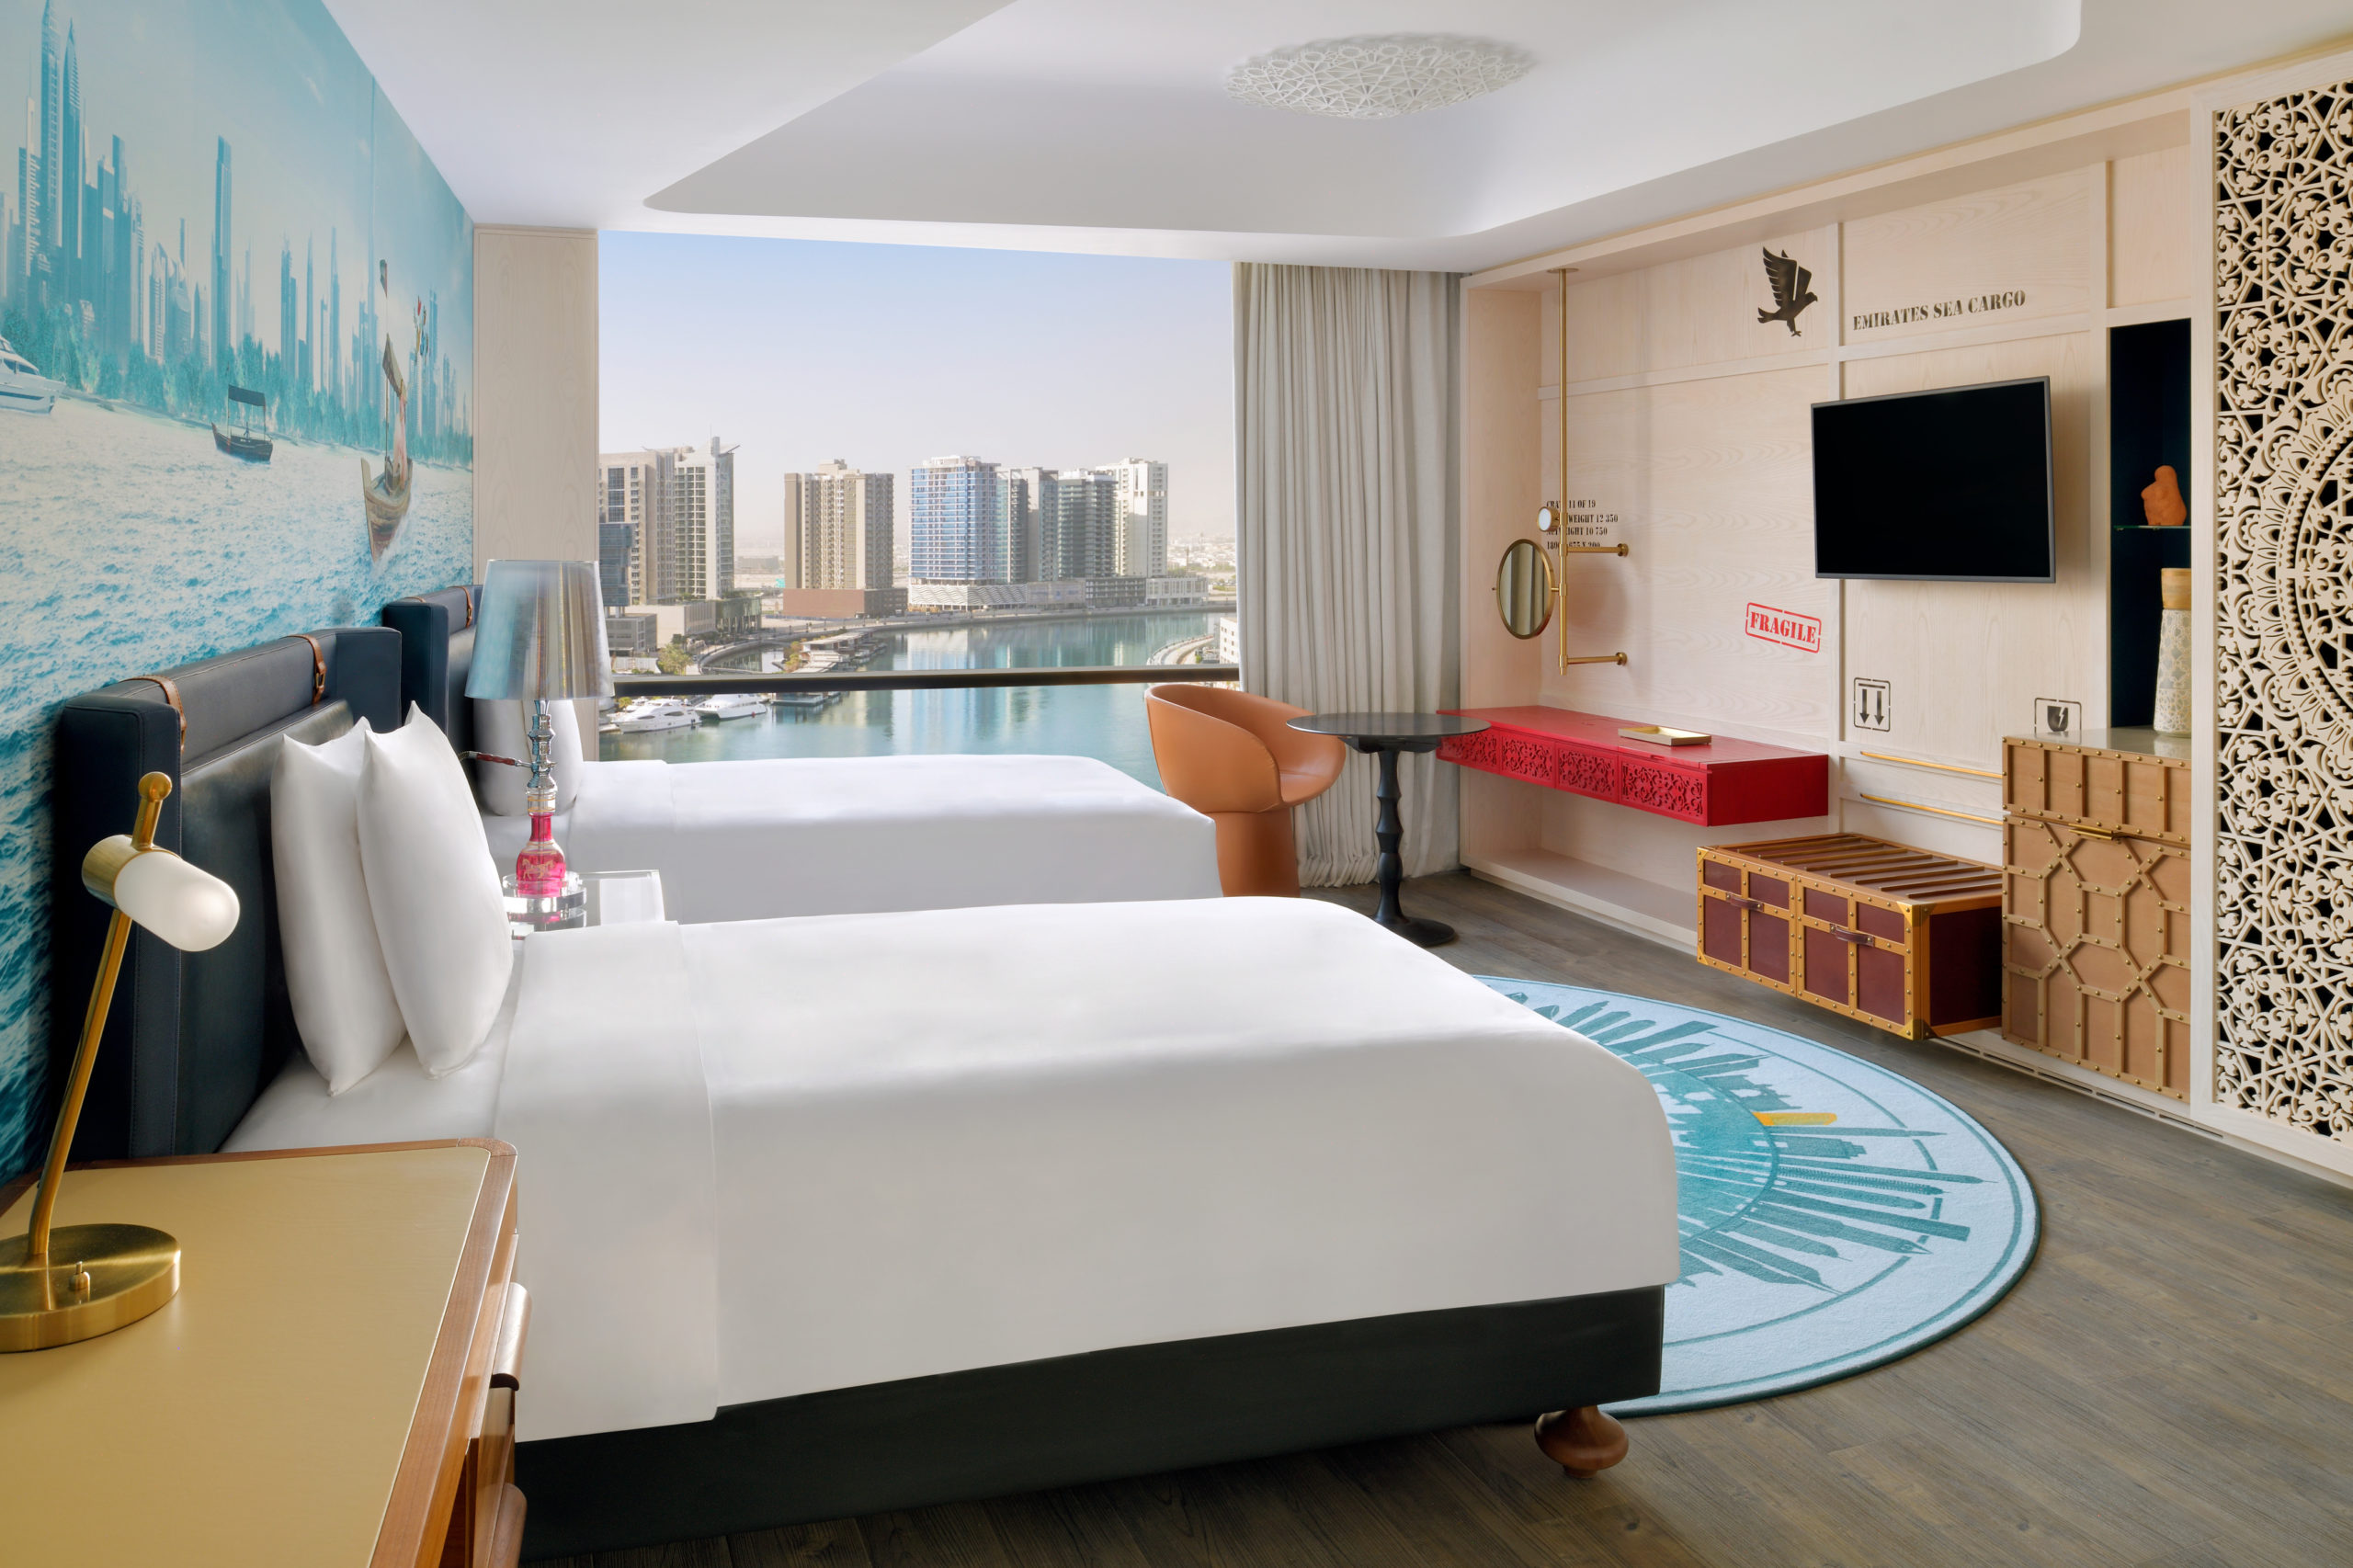 Best Hotel Deals in Dubai and Staycation Packages